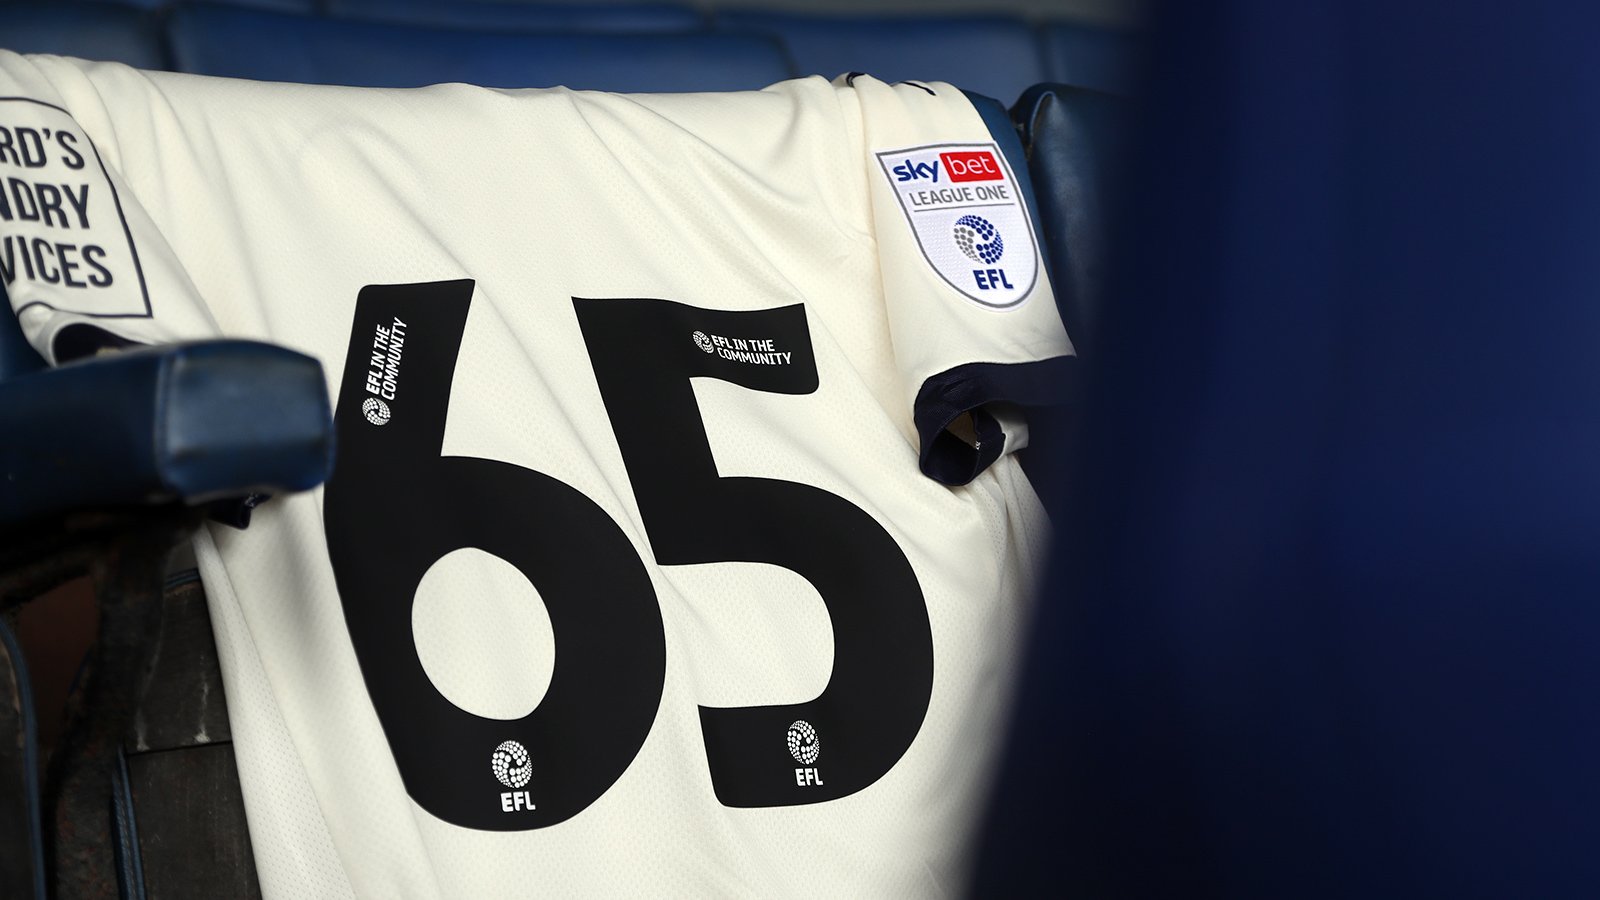 Official EFL shirt numbers